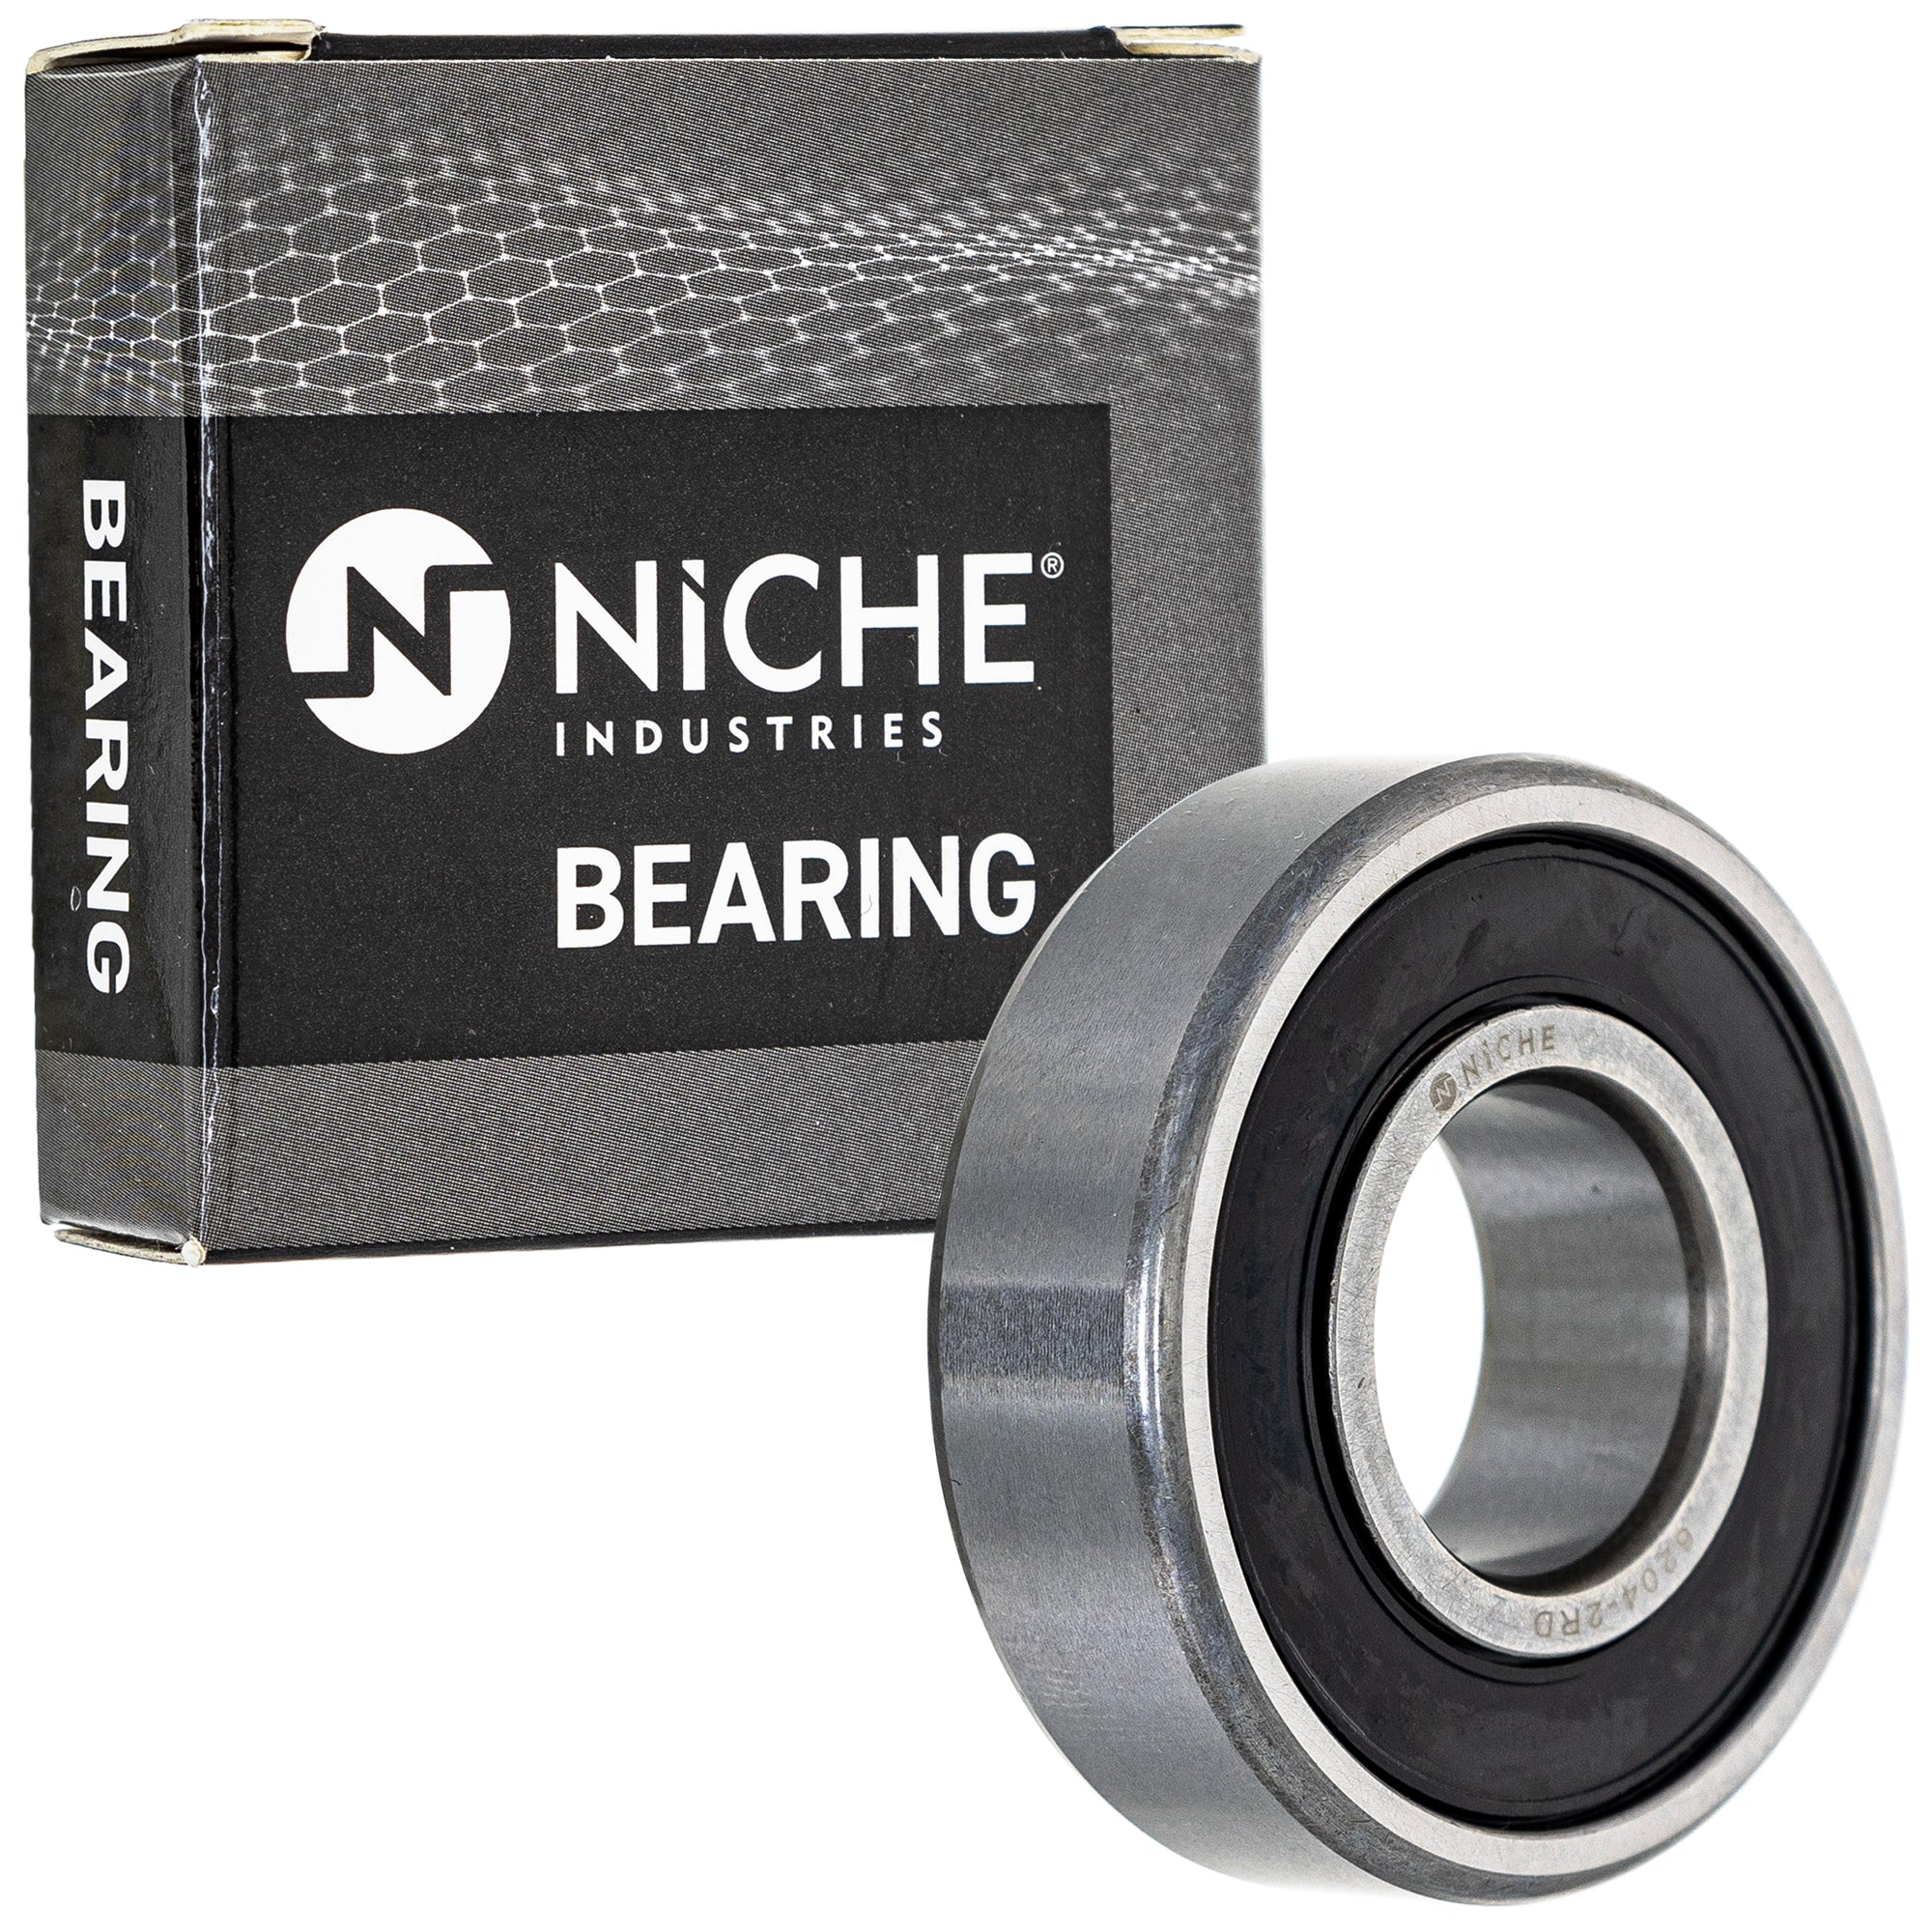 NICHE 519-CBB2212R Bearing 2-Pack for zOTHER Snapper MURRAY Murray